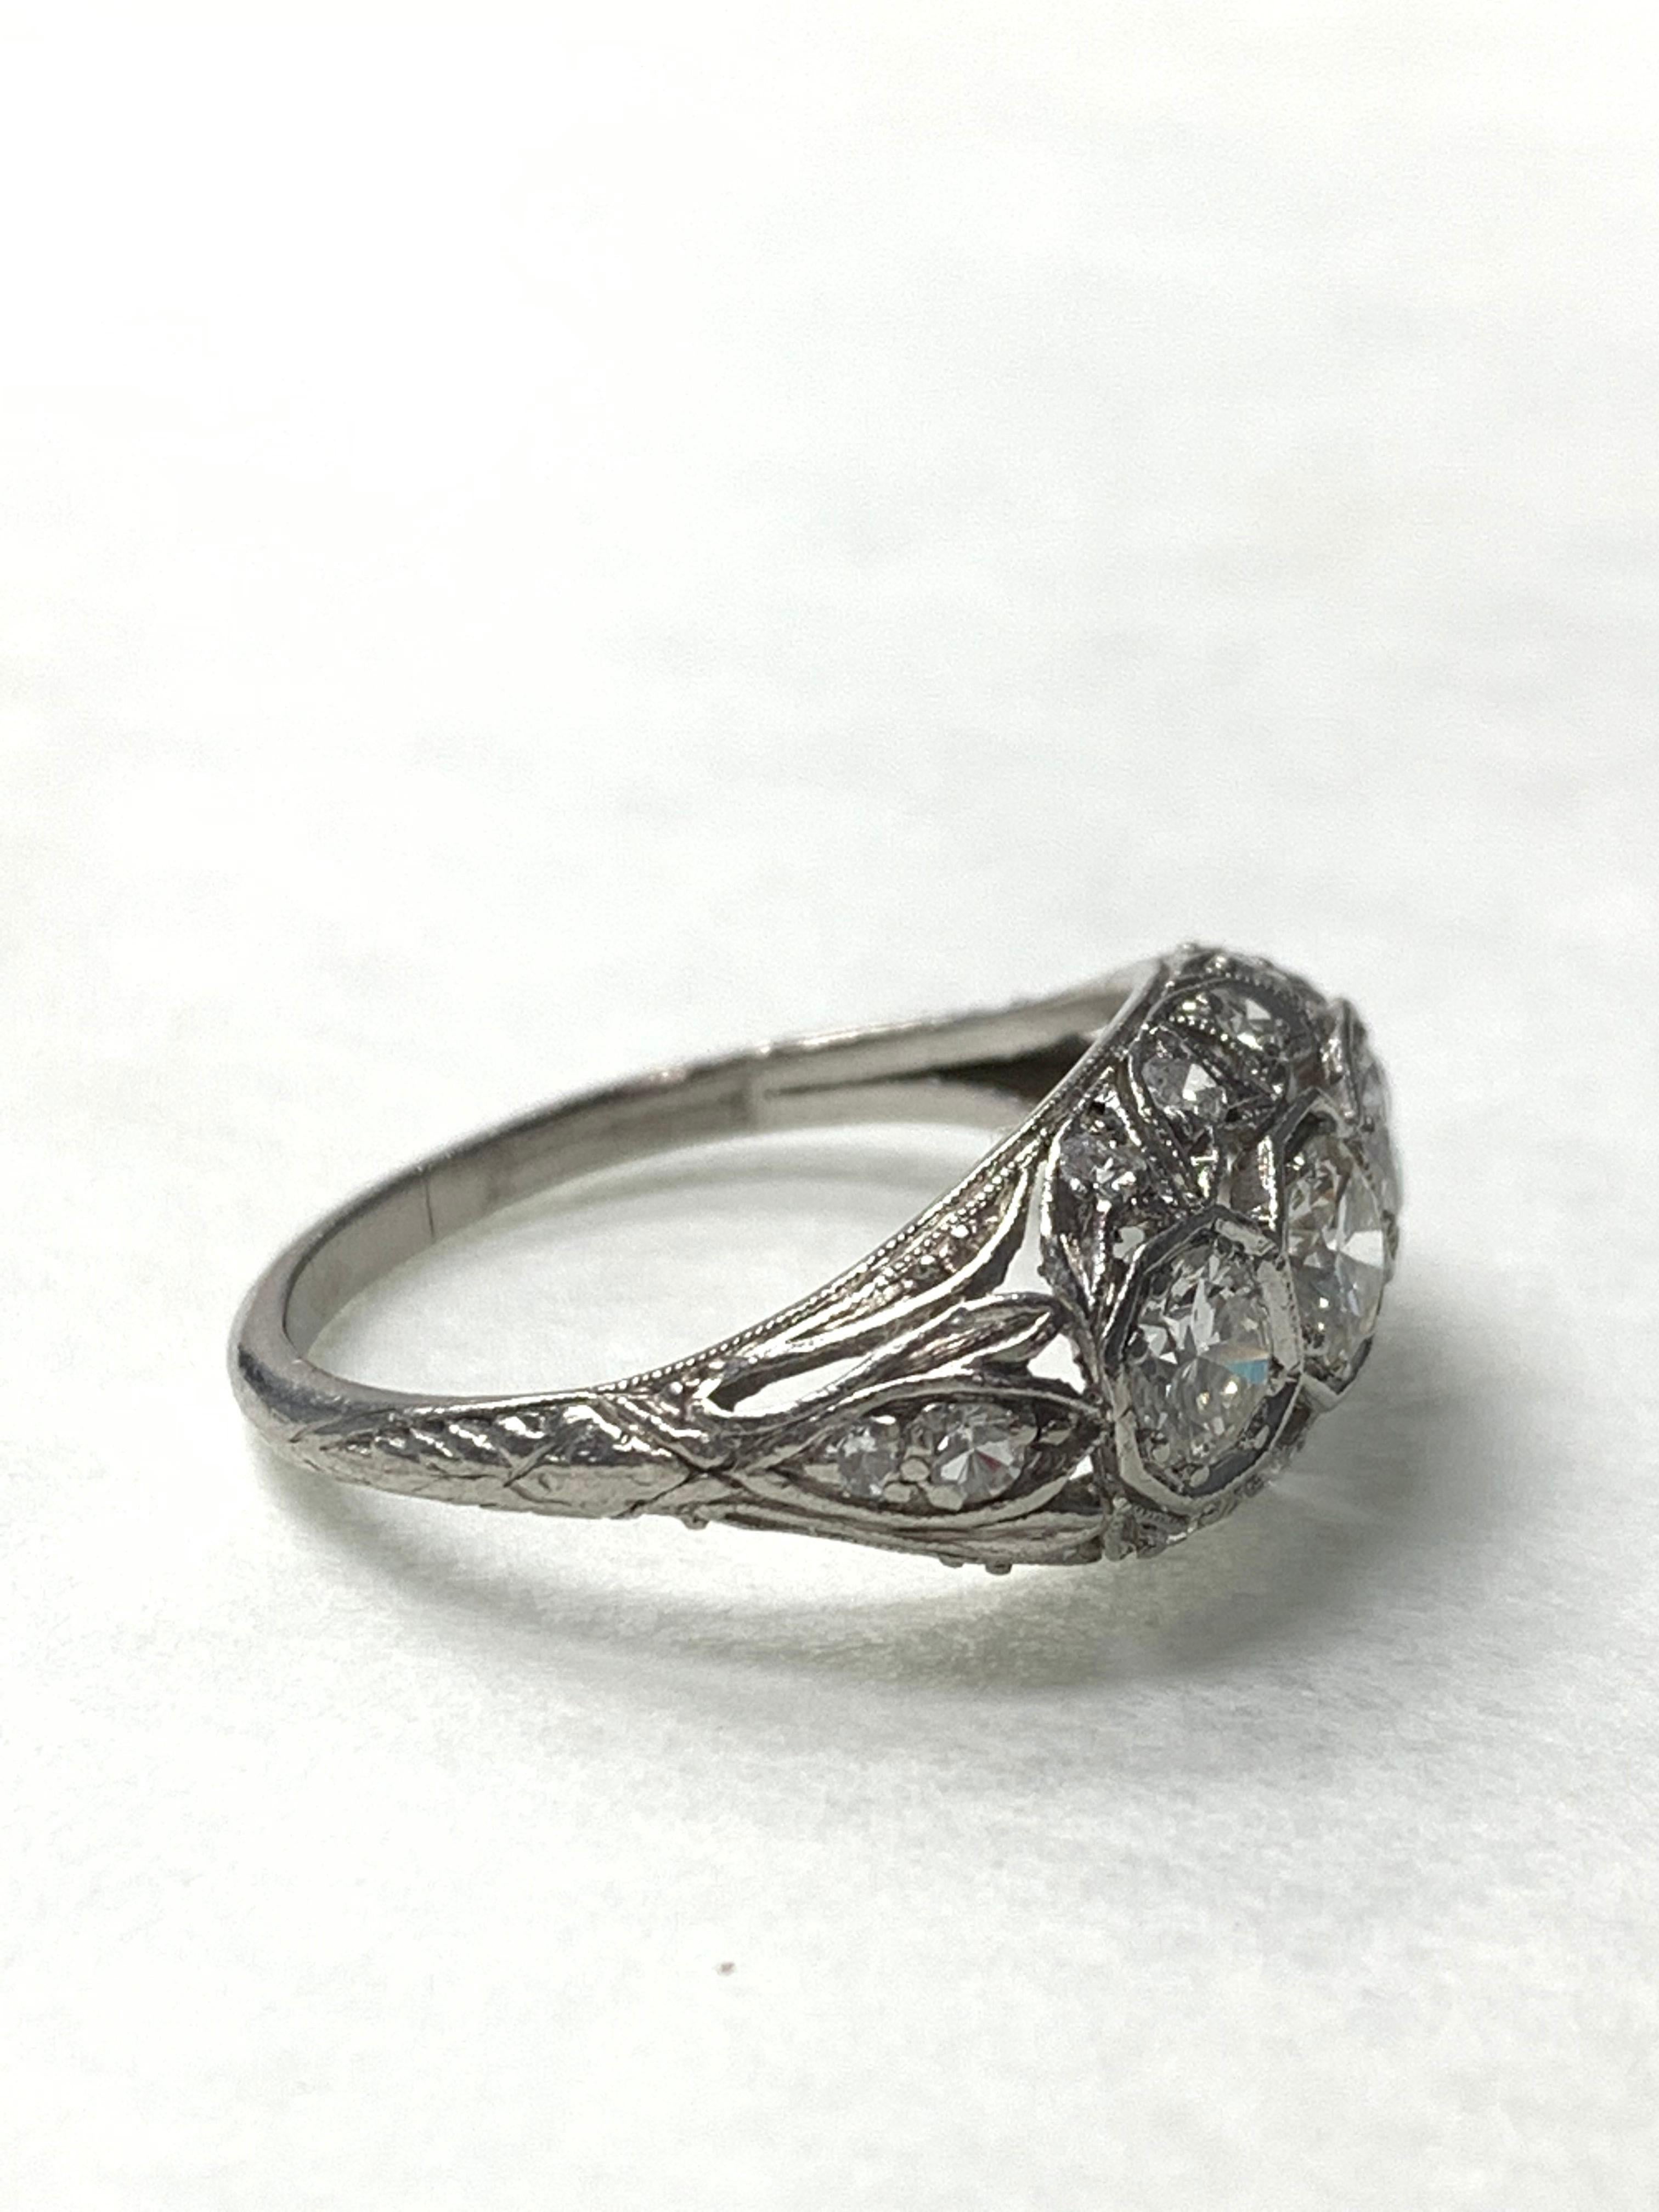 1920 Antique Three-Stone Old European Cut Diamond Ring in Platinum In Excellent Condition For Sale In New York, NY